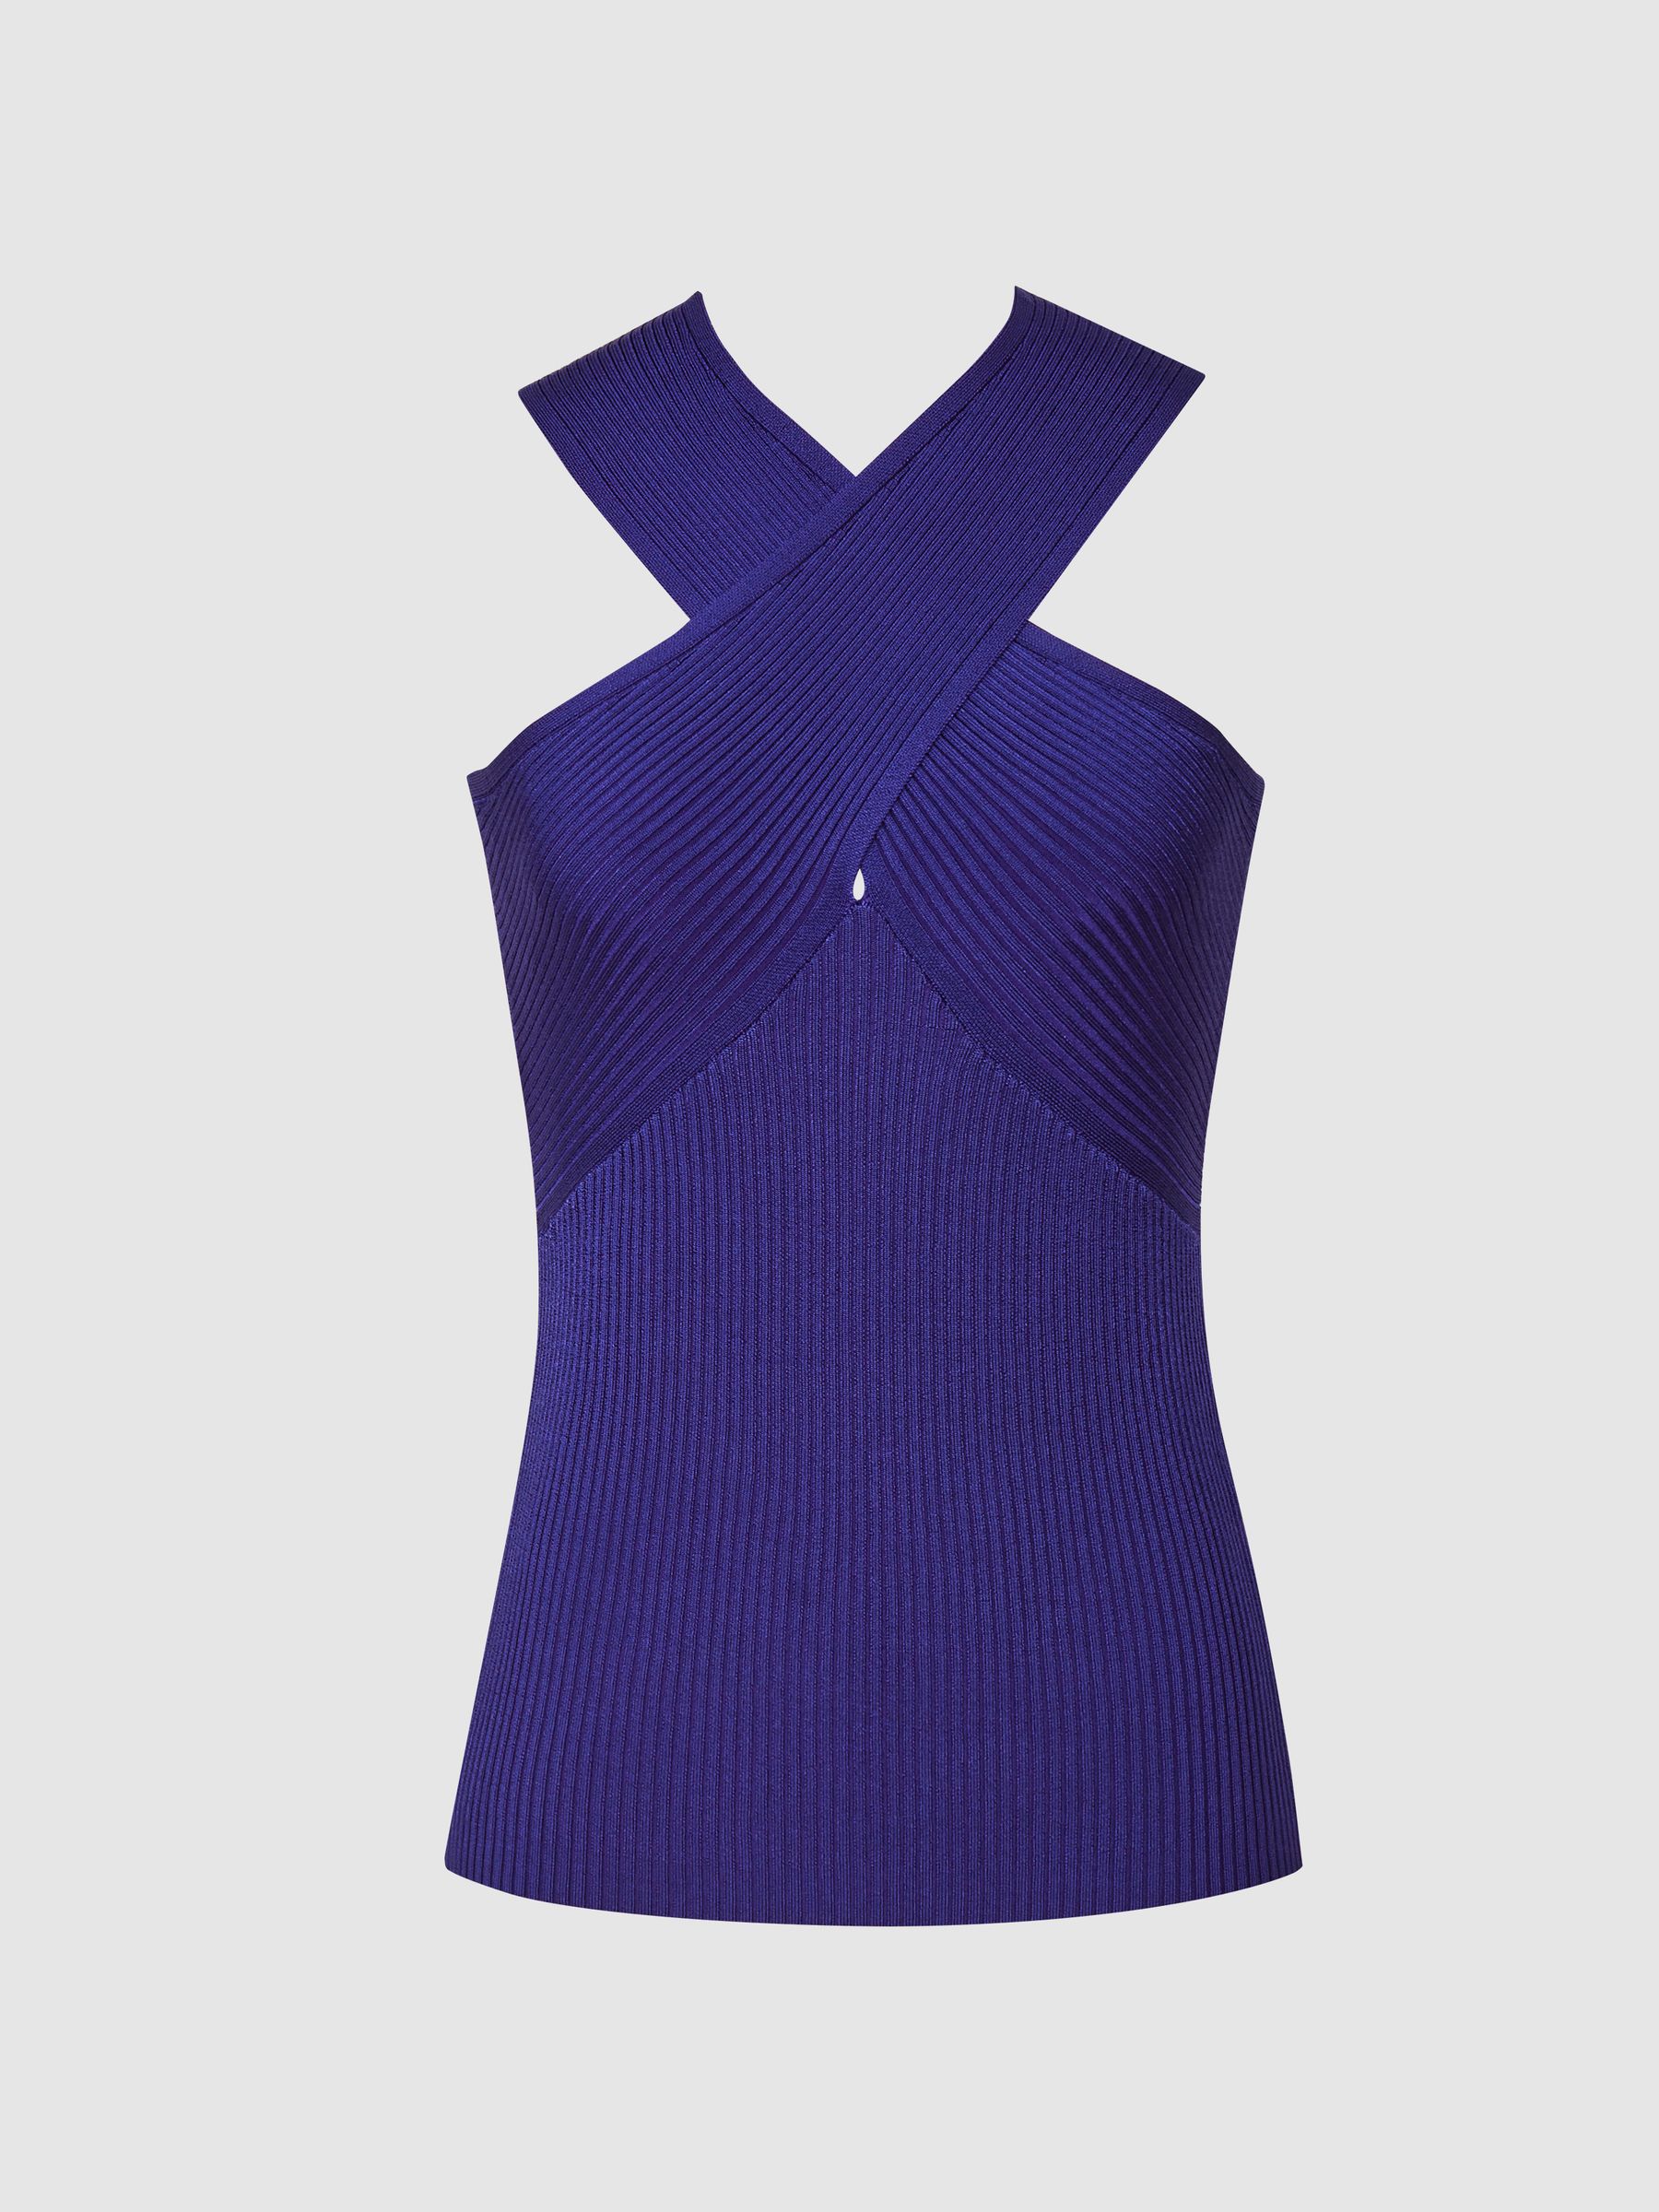 Reiss Lily Knitted Halterneck Cami Vest Top - REISS